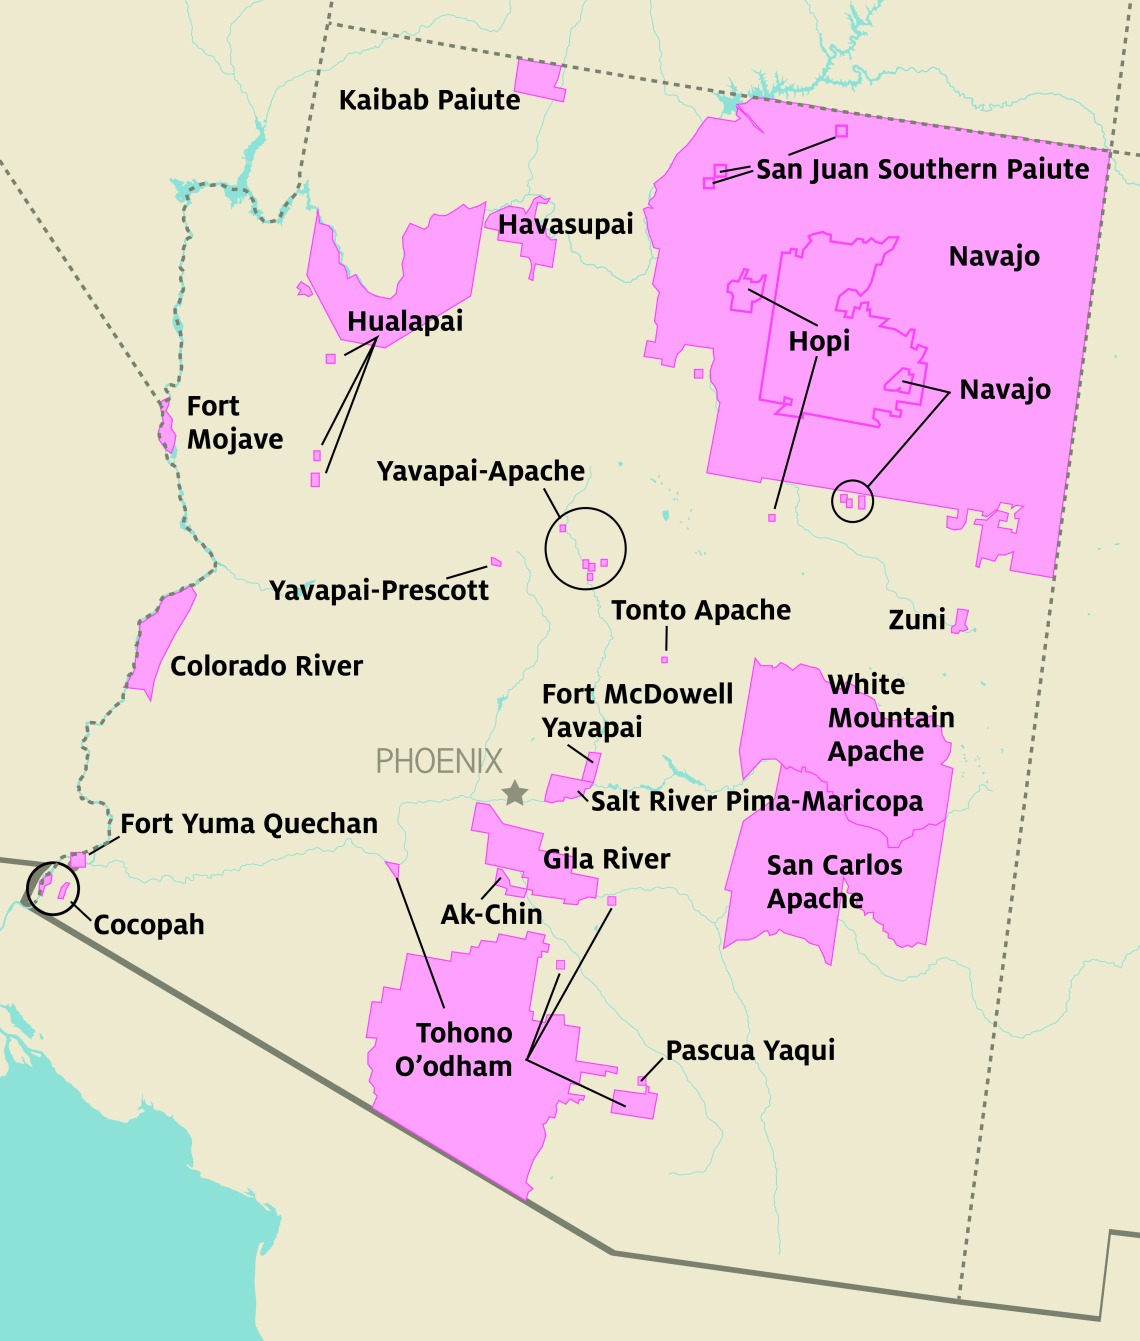 this photo is a map of Arizona showing the locations of tribal communities